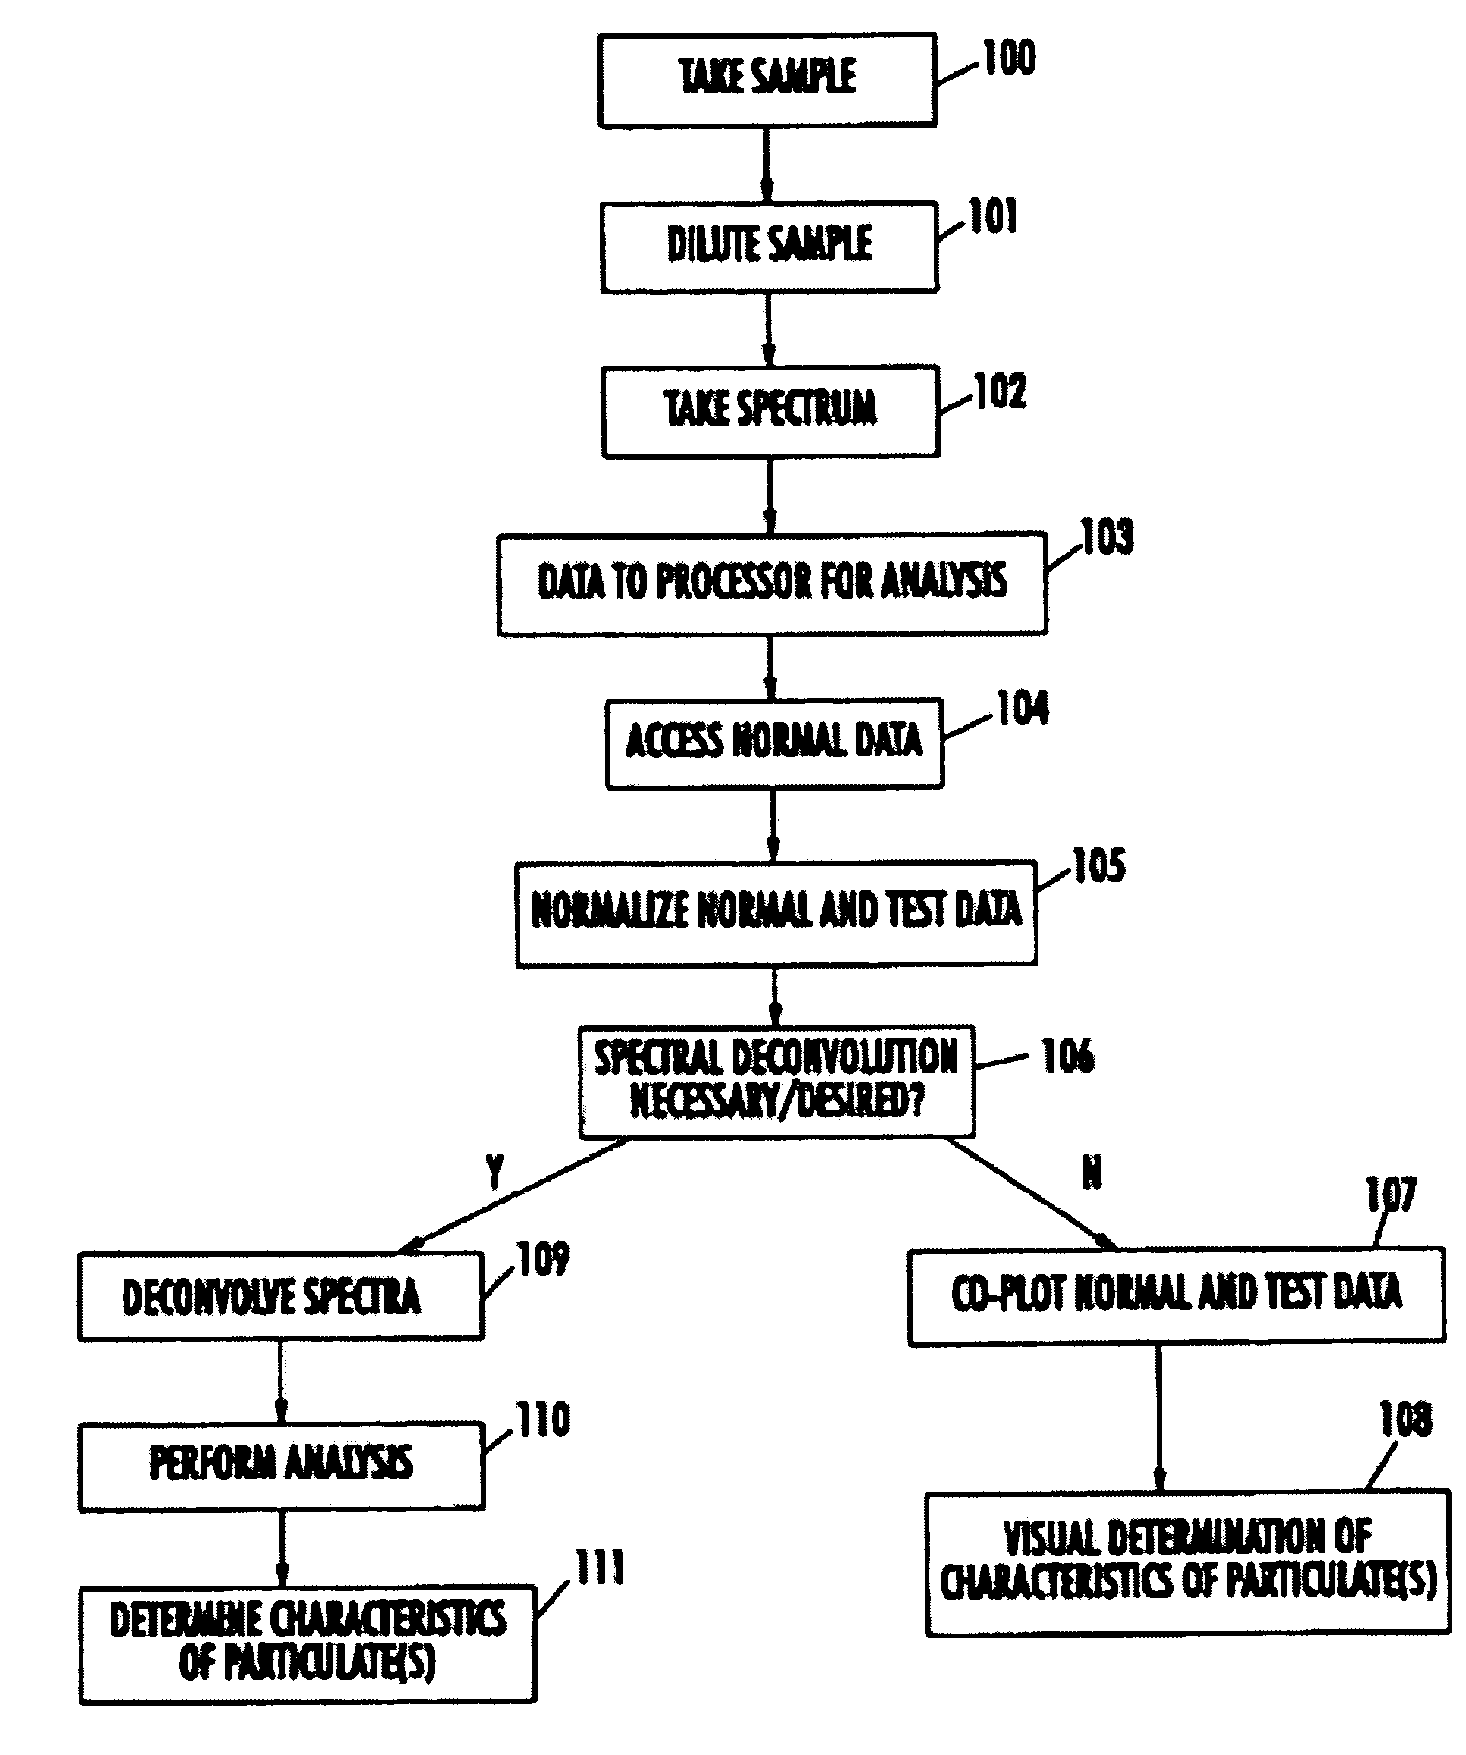 Spectrophotometric system and method for the identification and characterization of a particle in a bodily fluid